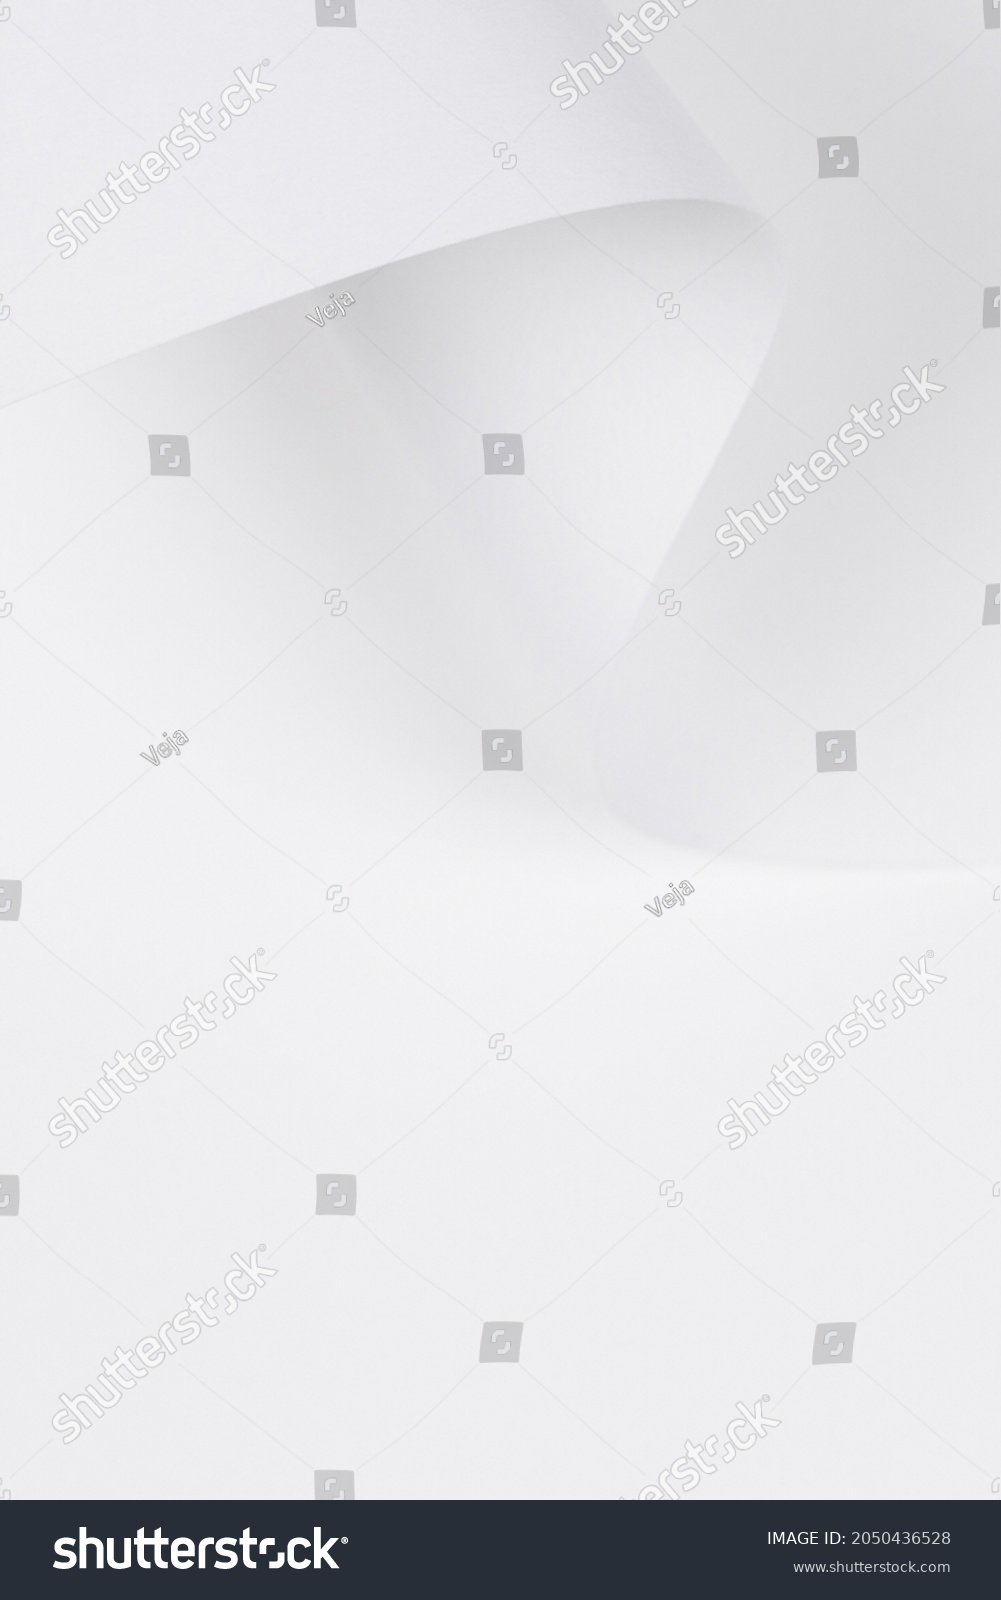 Abstract geometric shape white color paper background. Creative monochrome background of shape and curve lines #2050436528